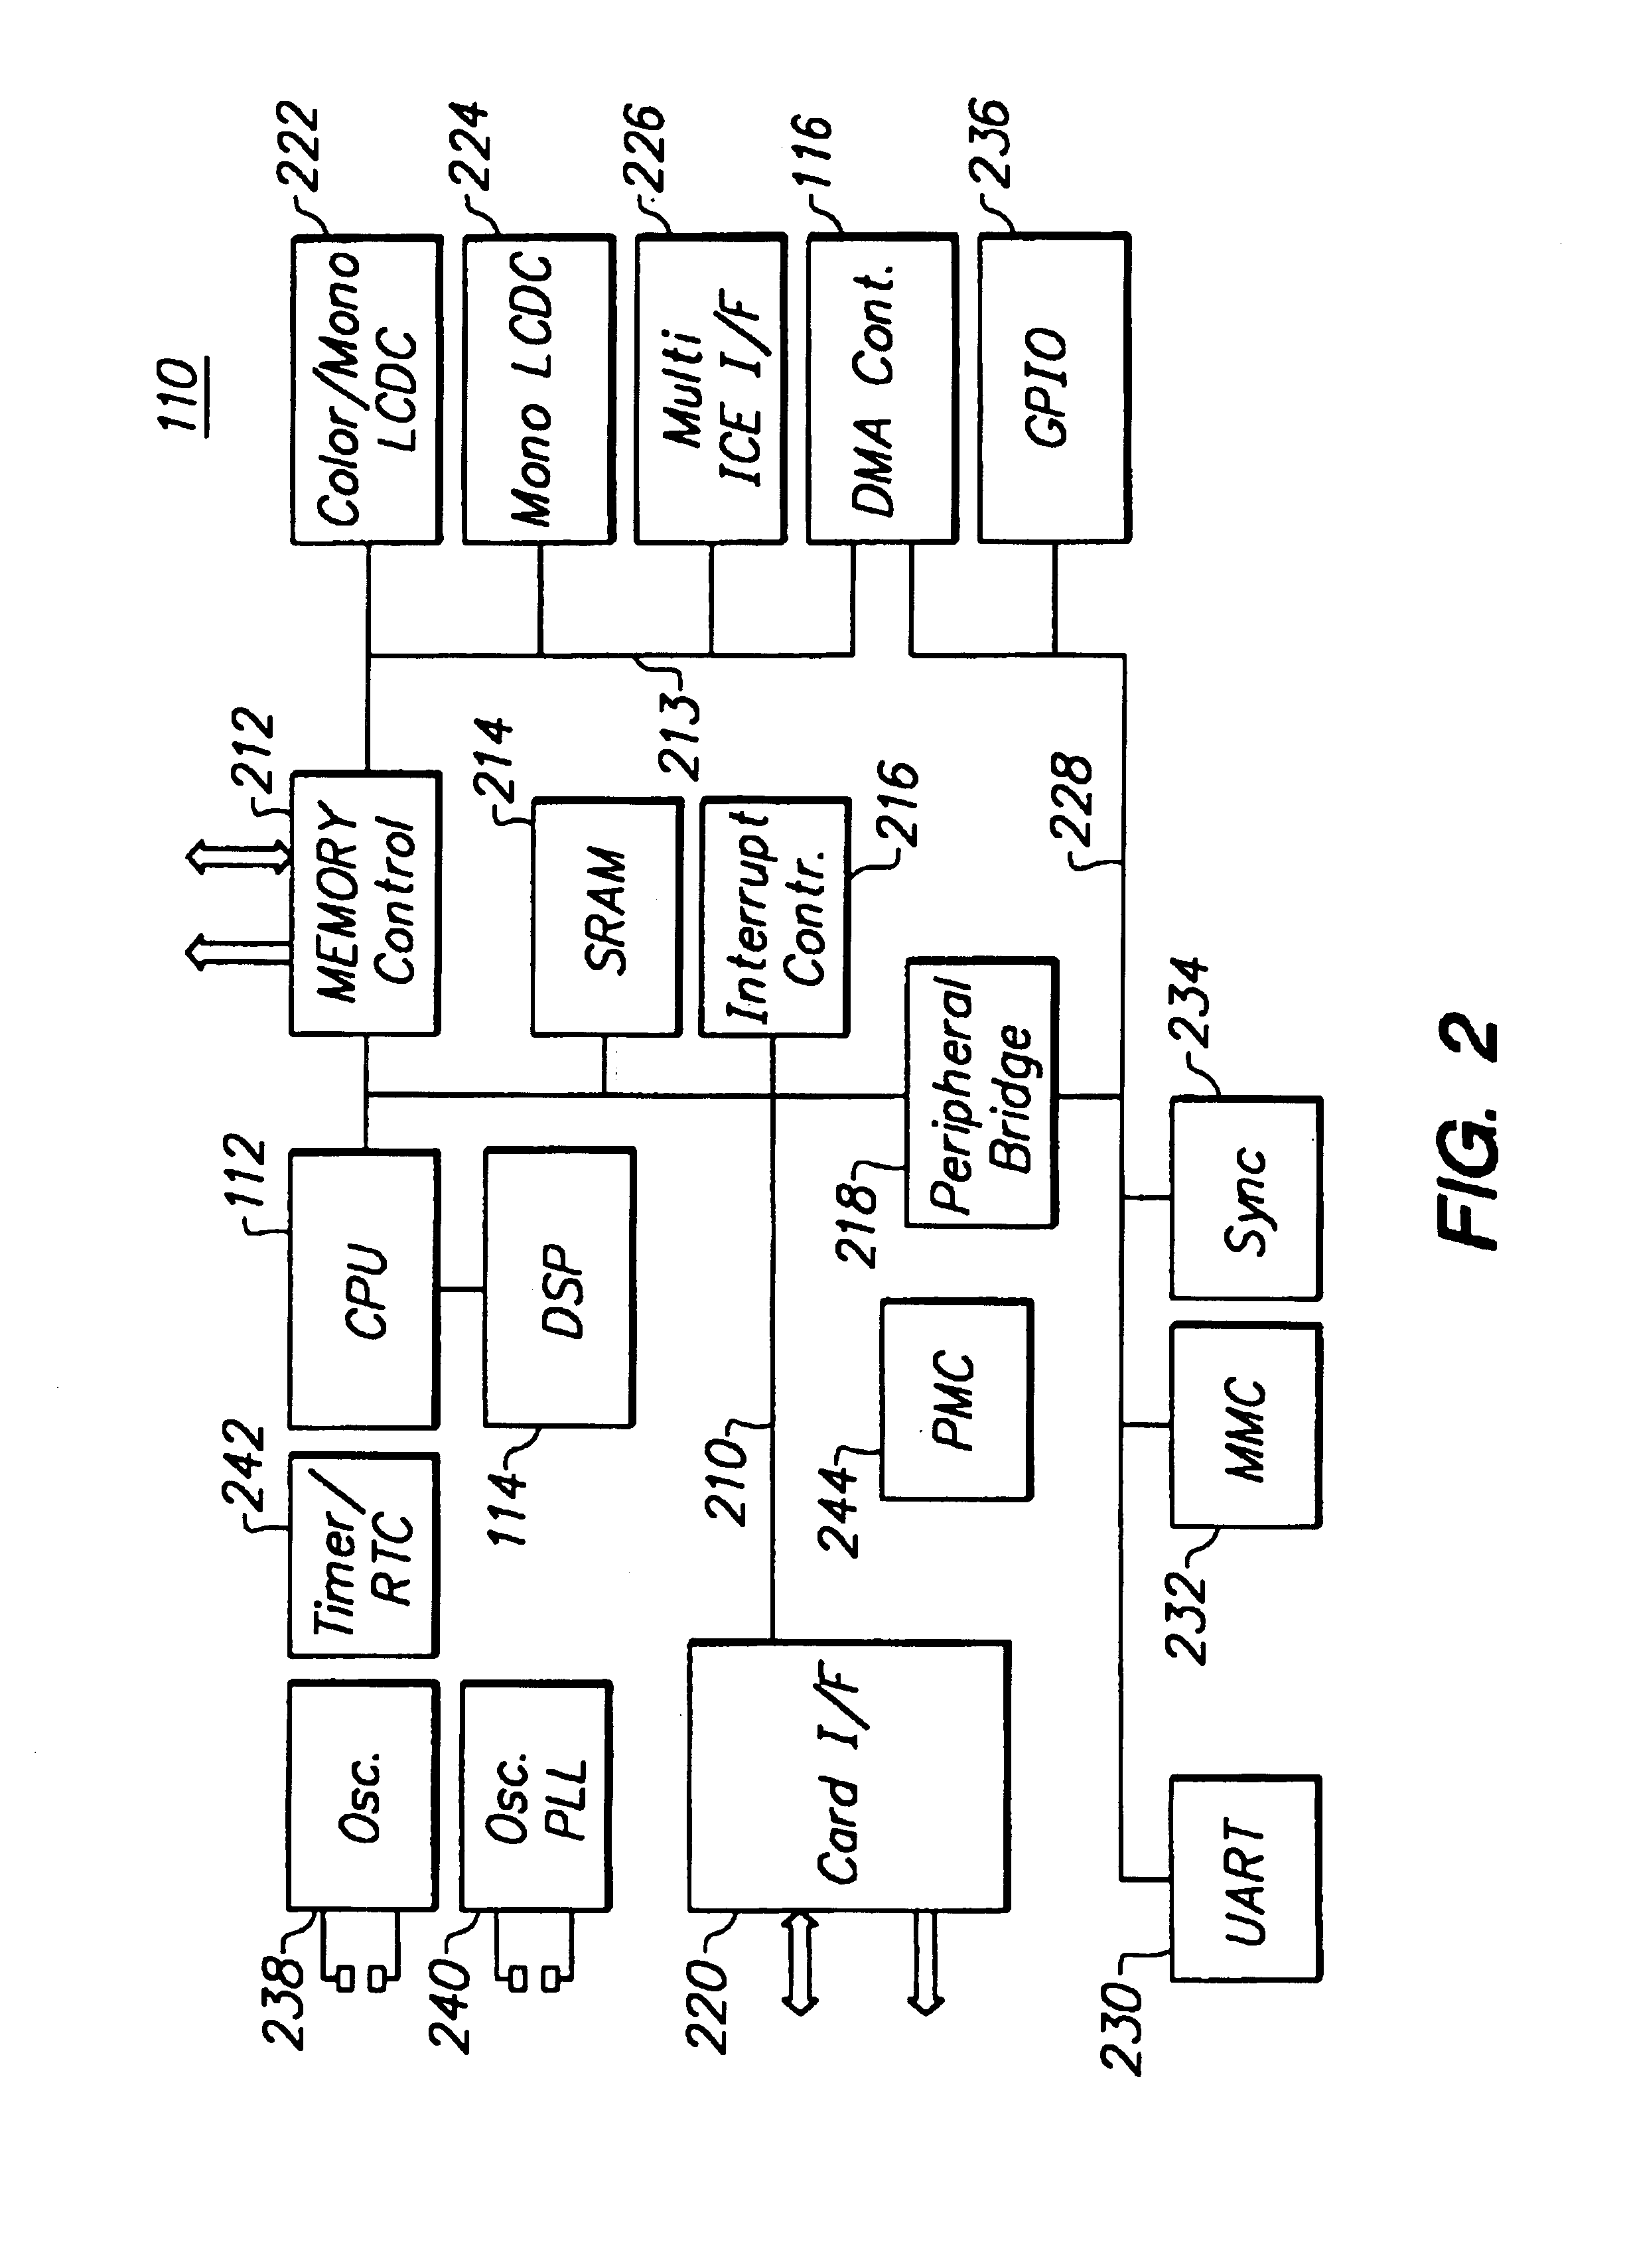 System and method for dynamic clock generation